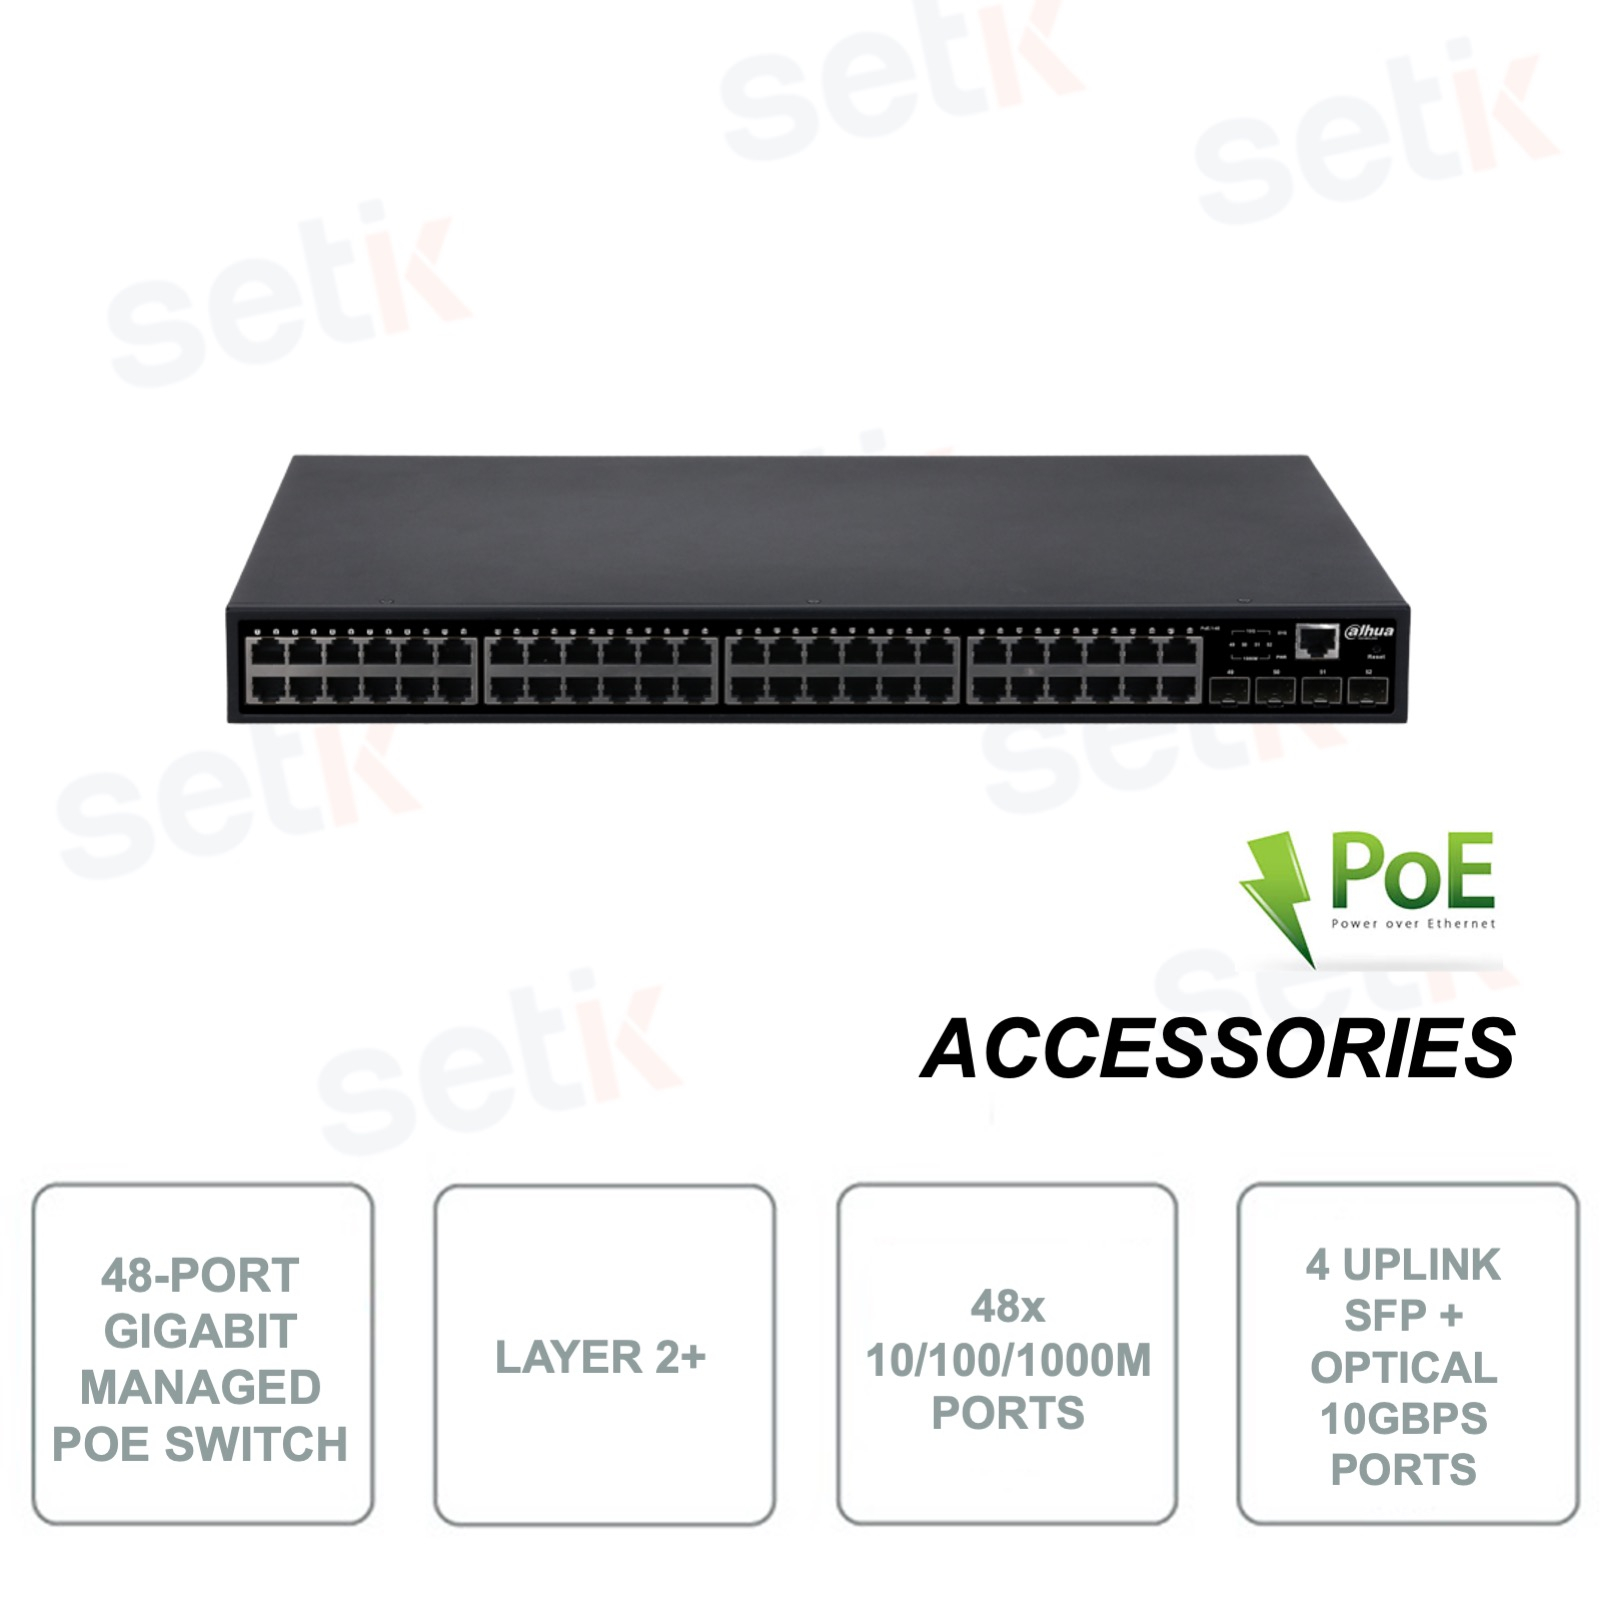 Ports + Fiber Dahua Ports 4 + Uplink - Commercial - Optical - PoE Network Manageable SFP 10Gbps Switch for PFS5452-48GT4XF-400 48